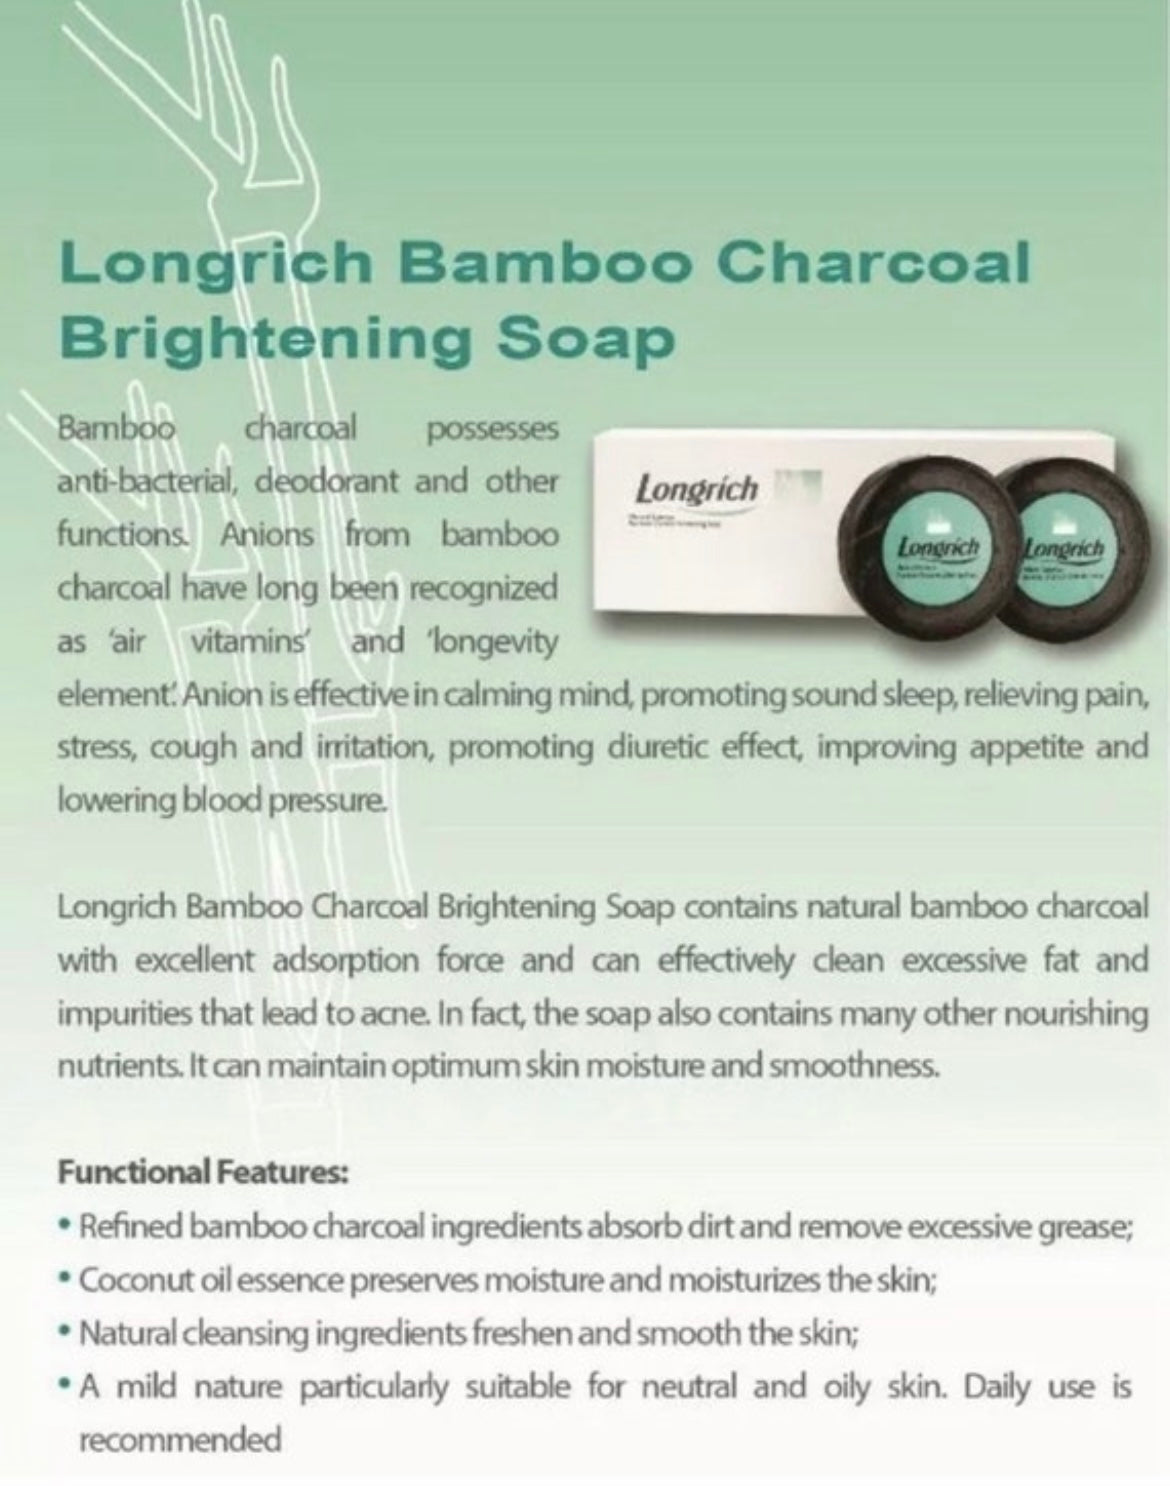 Longrich Natural Essence Bamboo Charcoal Soap / Fights Acne, Pimples / After Shave for Men 100gX3